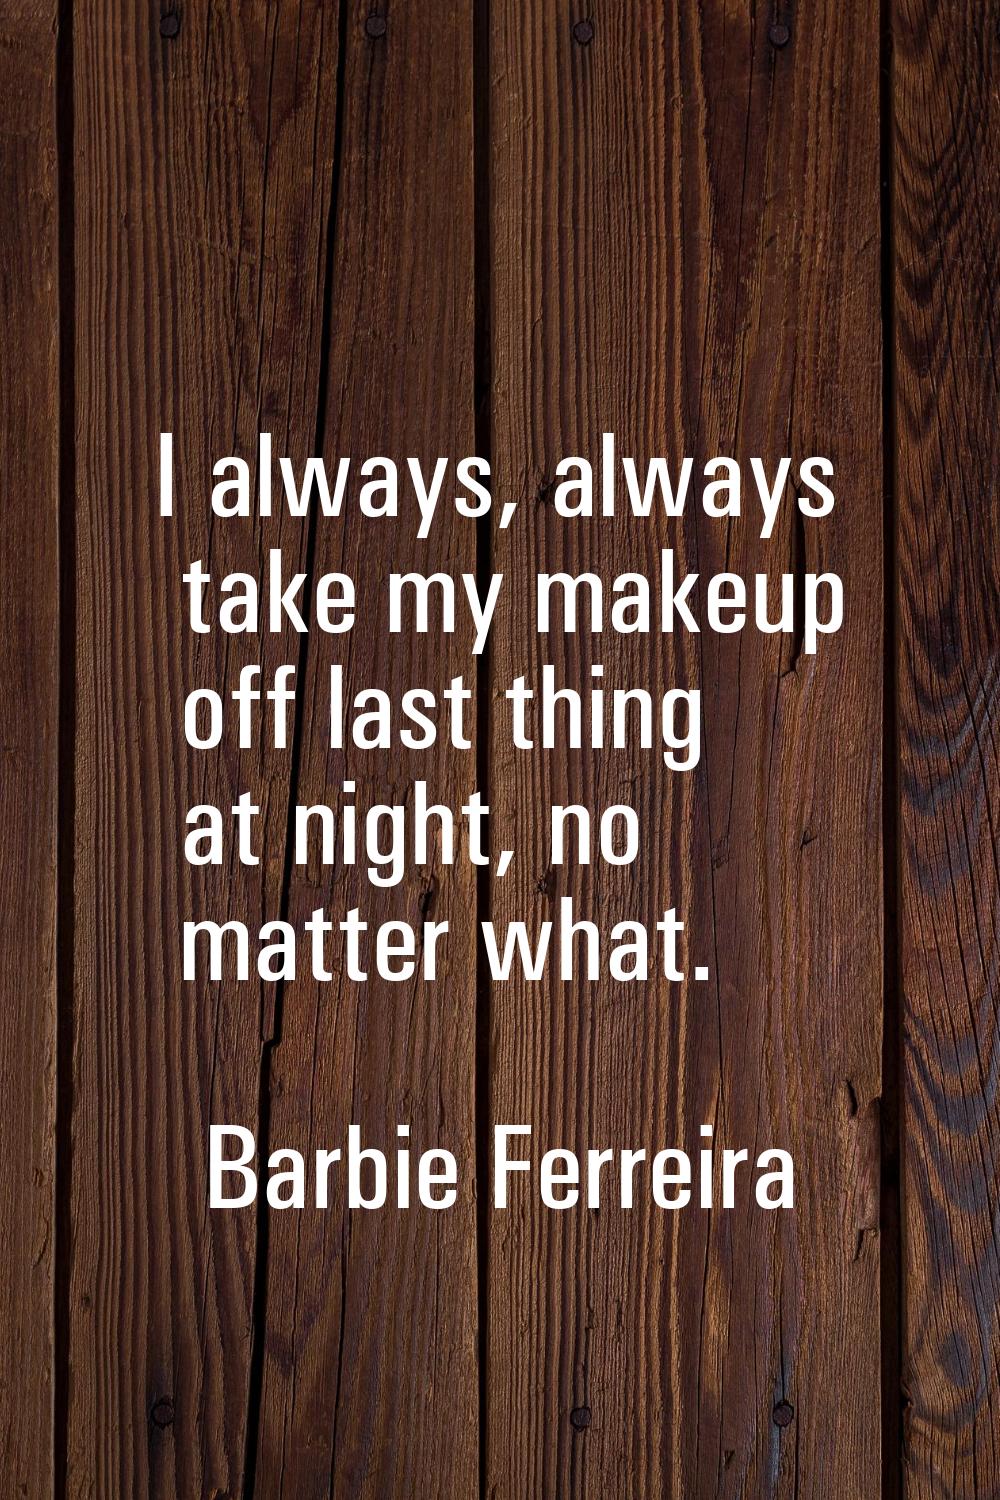 I always, always take my makeup off last thing at night, no matter what.